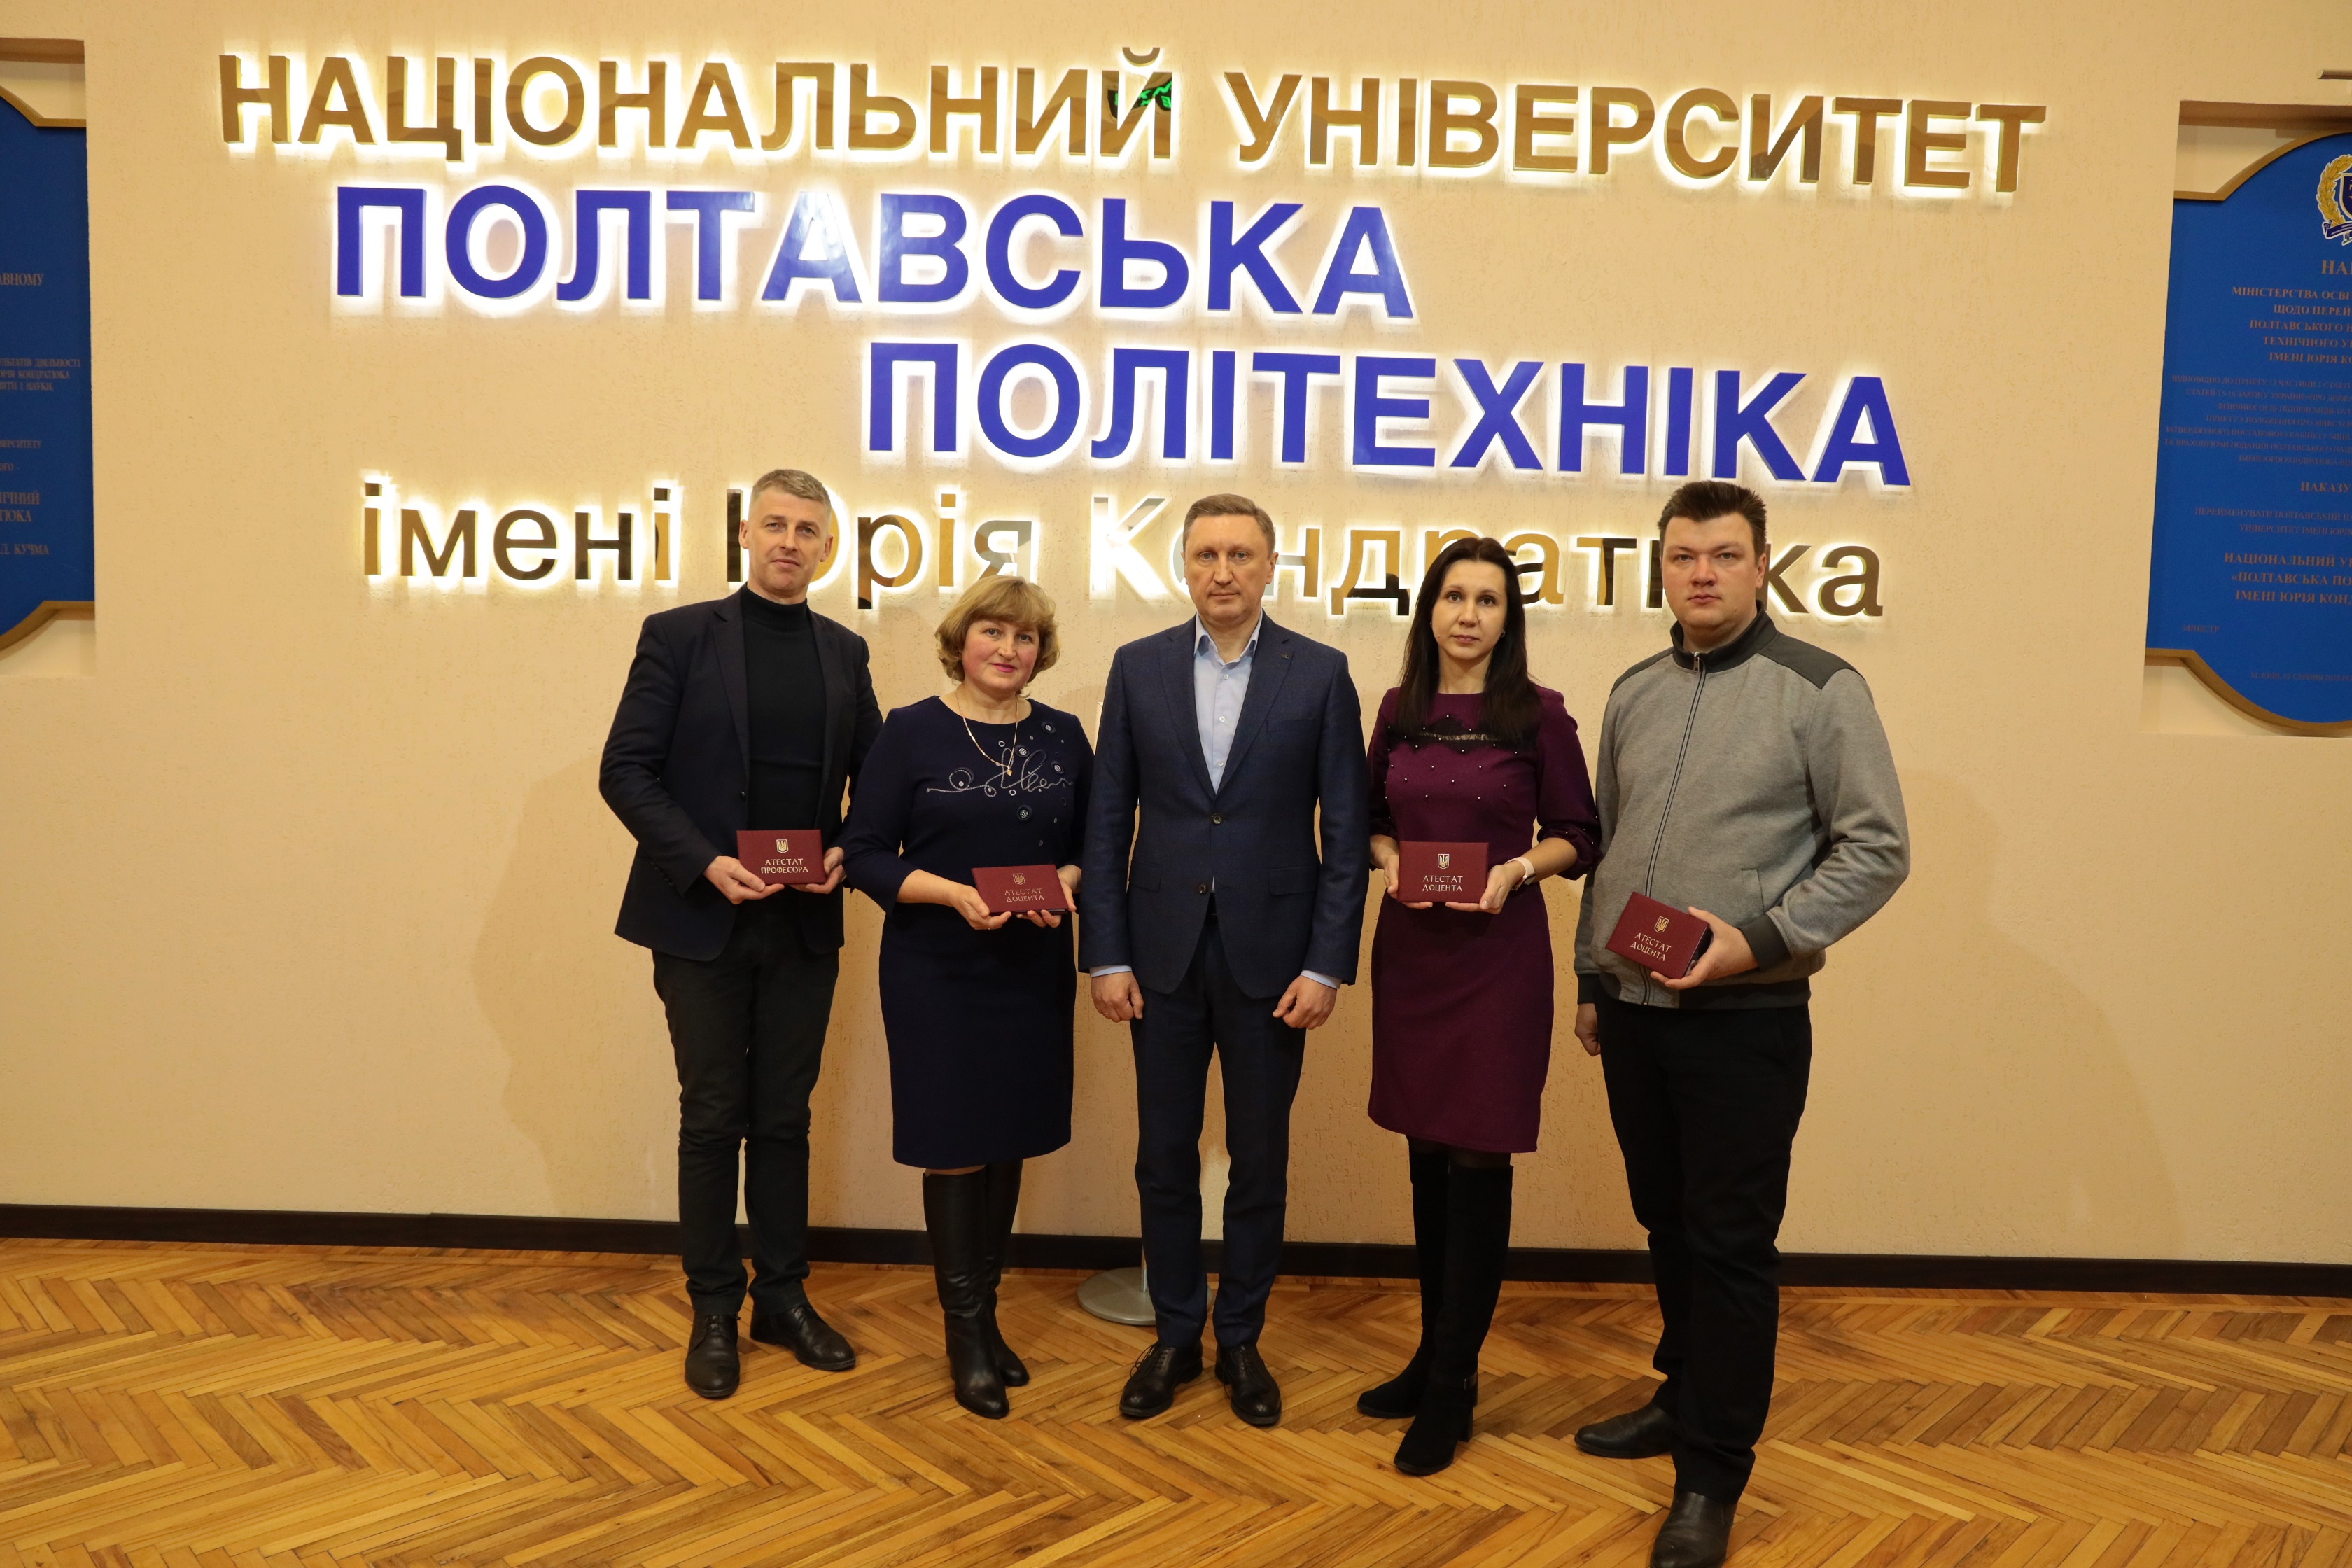 Five scientists of Poltava Polytechnic receive certificates of academic titles